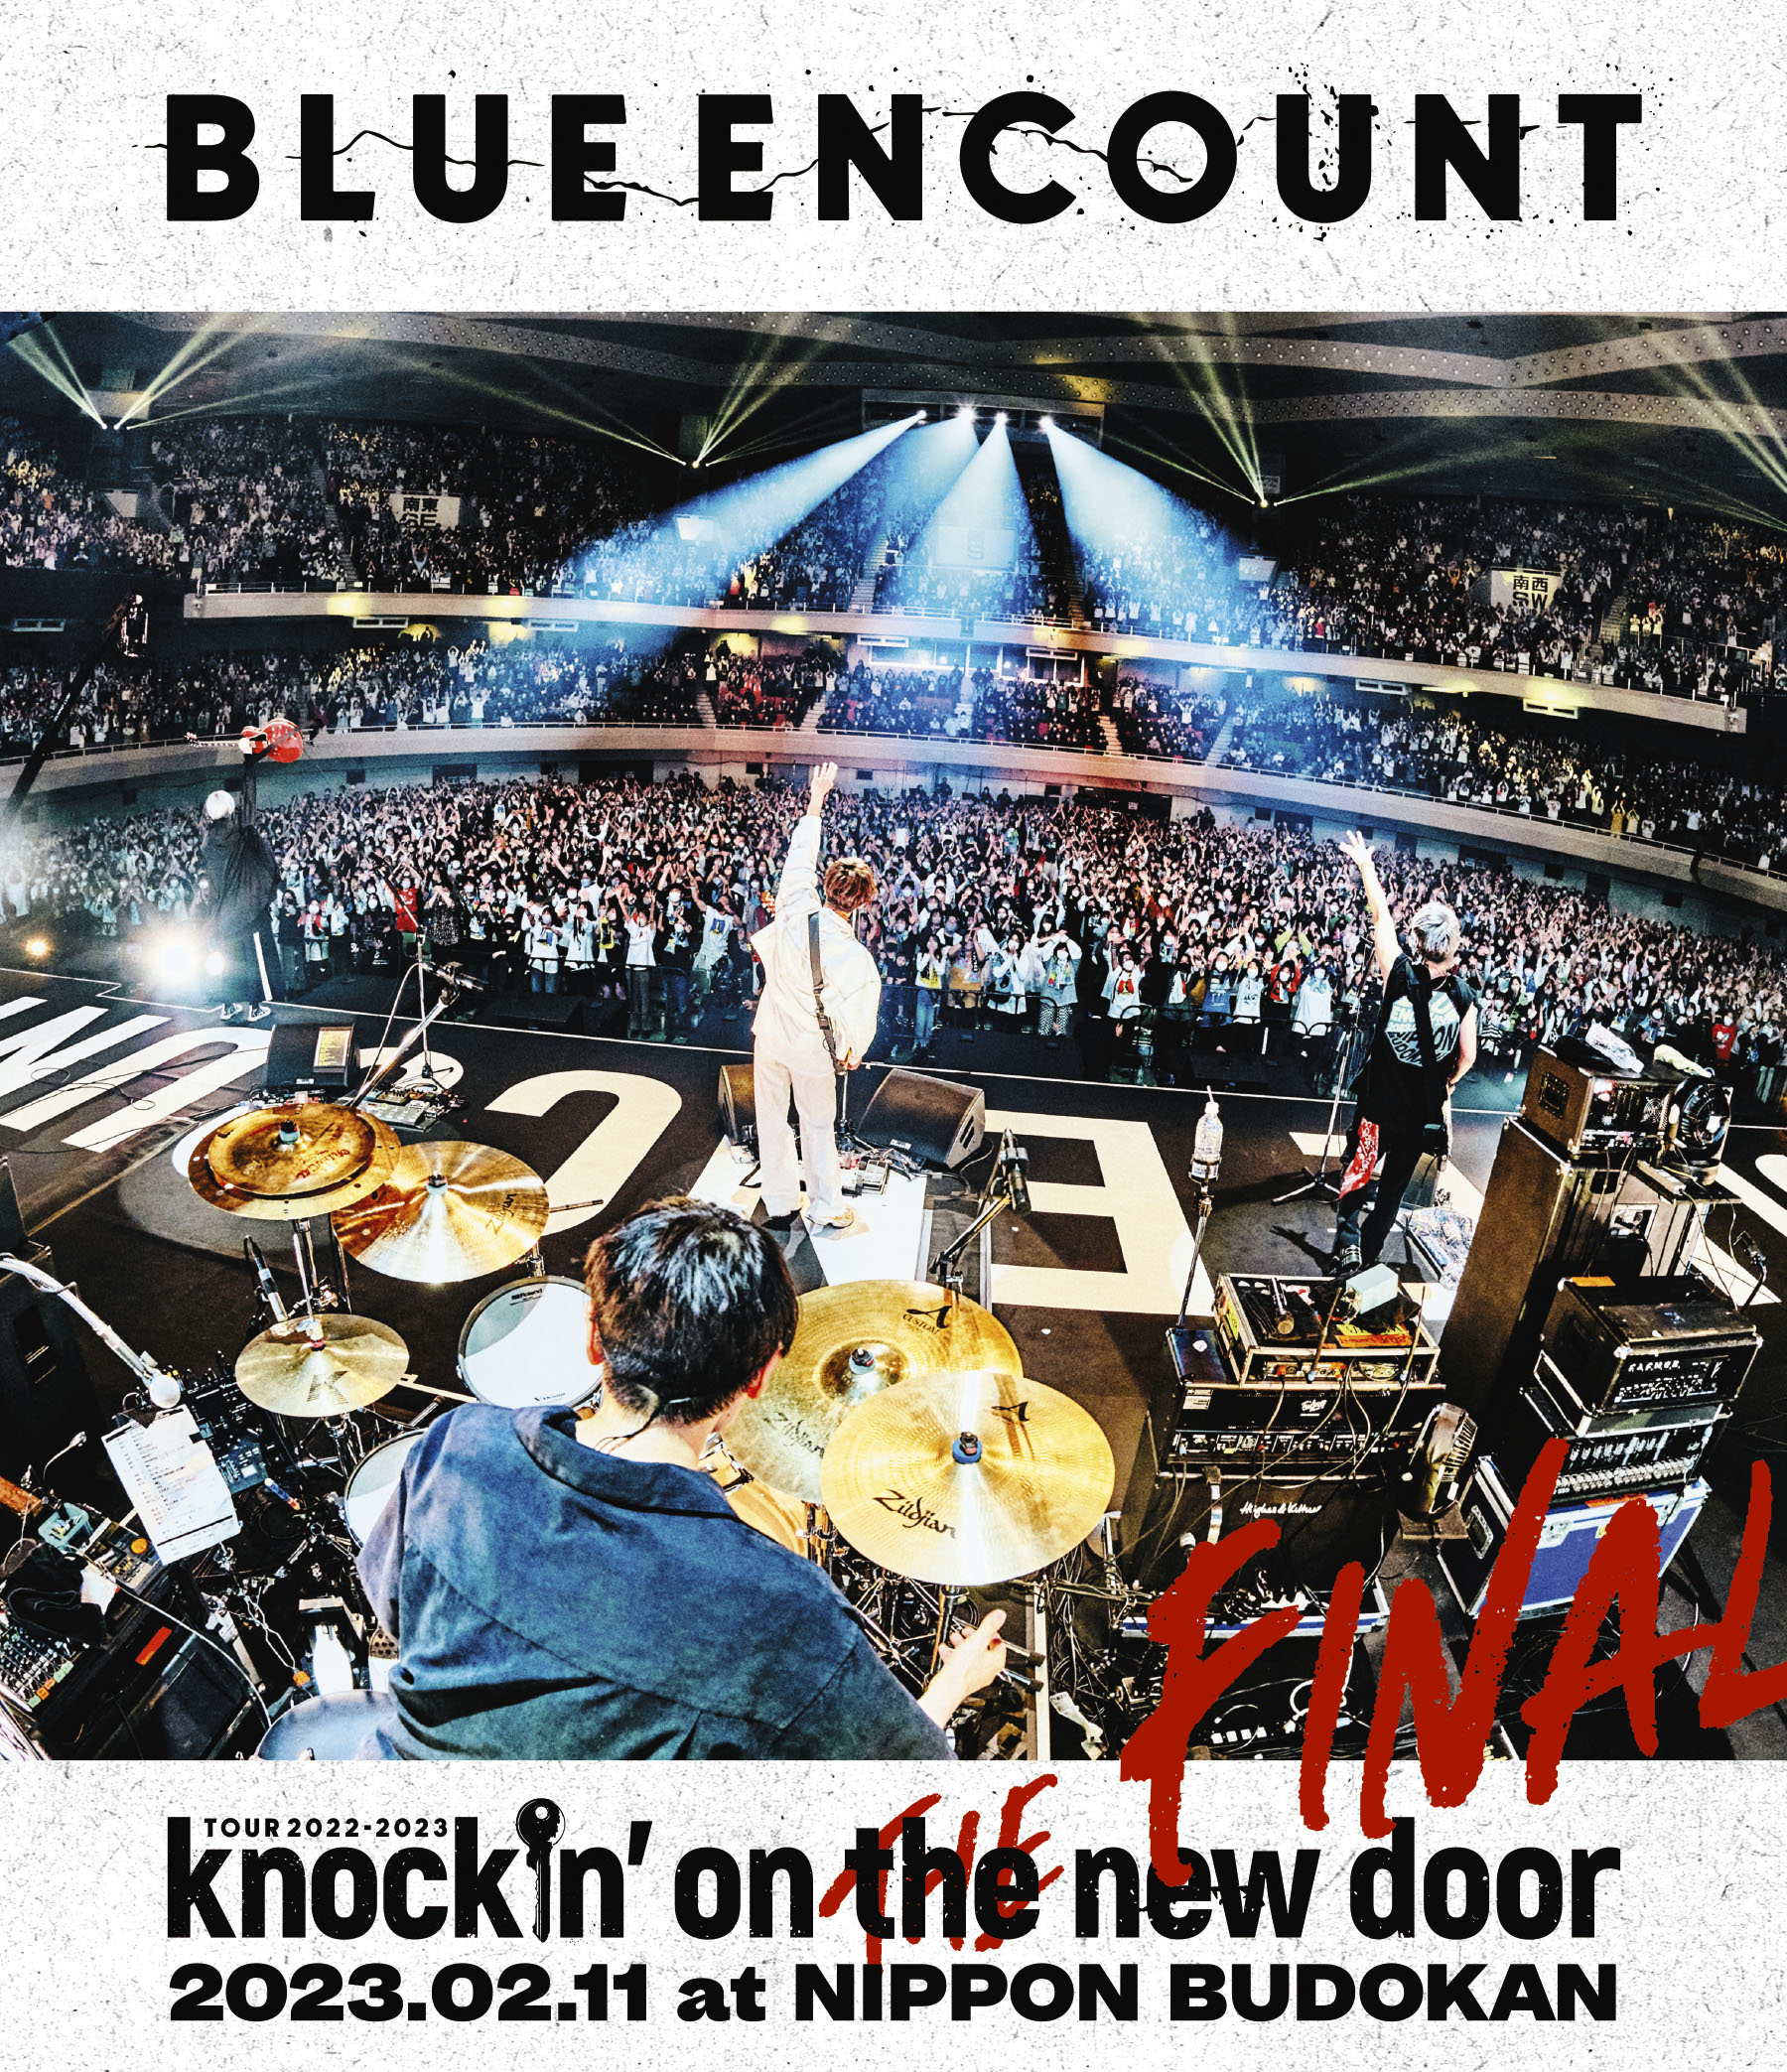 「BLUE ENCOUNT TOUR 2022-2023 〜knockin' on the new door〜THE FINAL」 2023.02.11 at NIPPON BUDOKAN